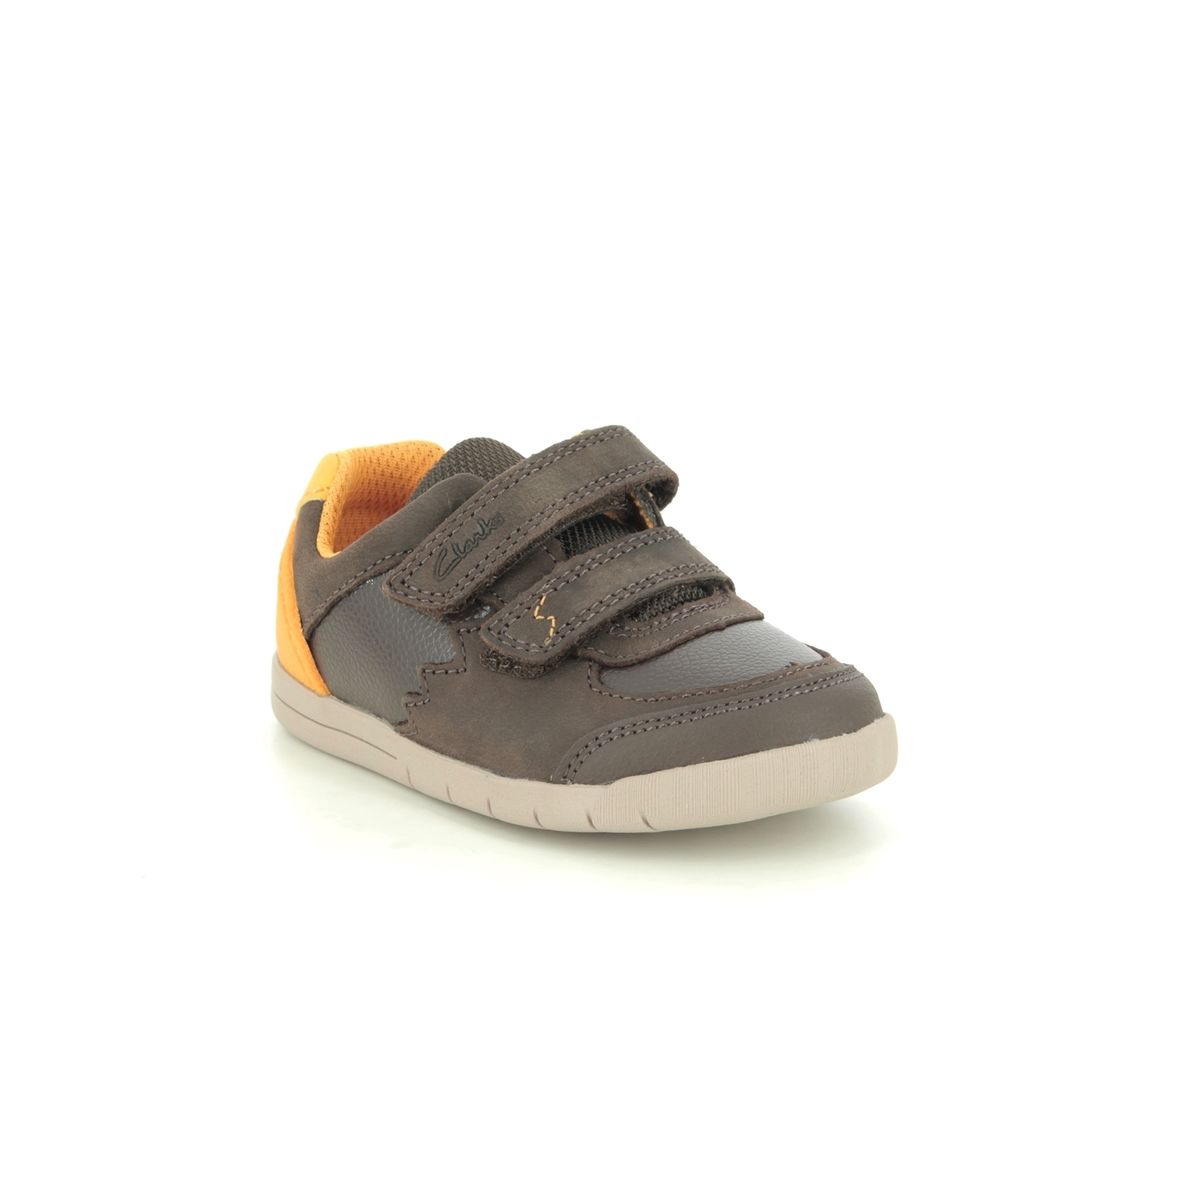 Clarks Rex Quest T Brown Leather Kids Boys Toddler Shoes 567756F In Size 8.5 In Plain Brown Leather F Width Fitting Regular Fit For kids